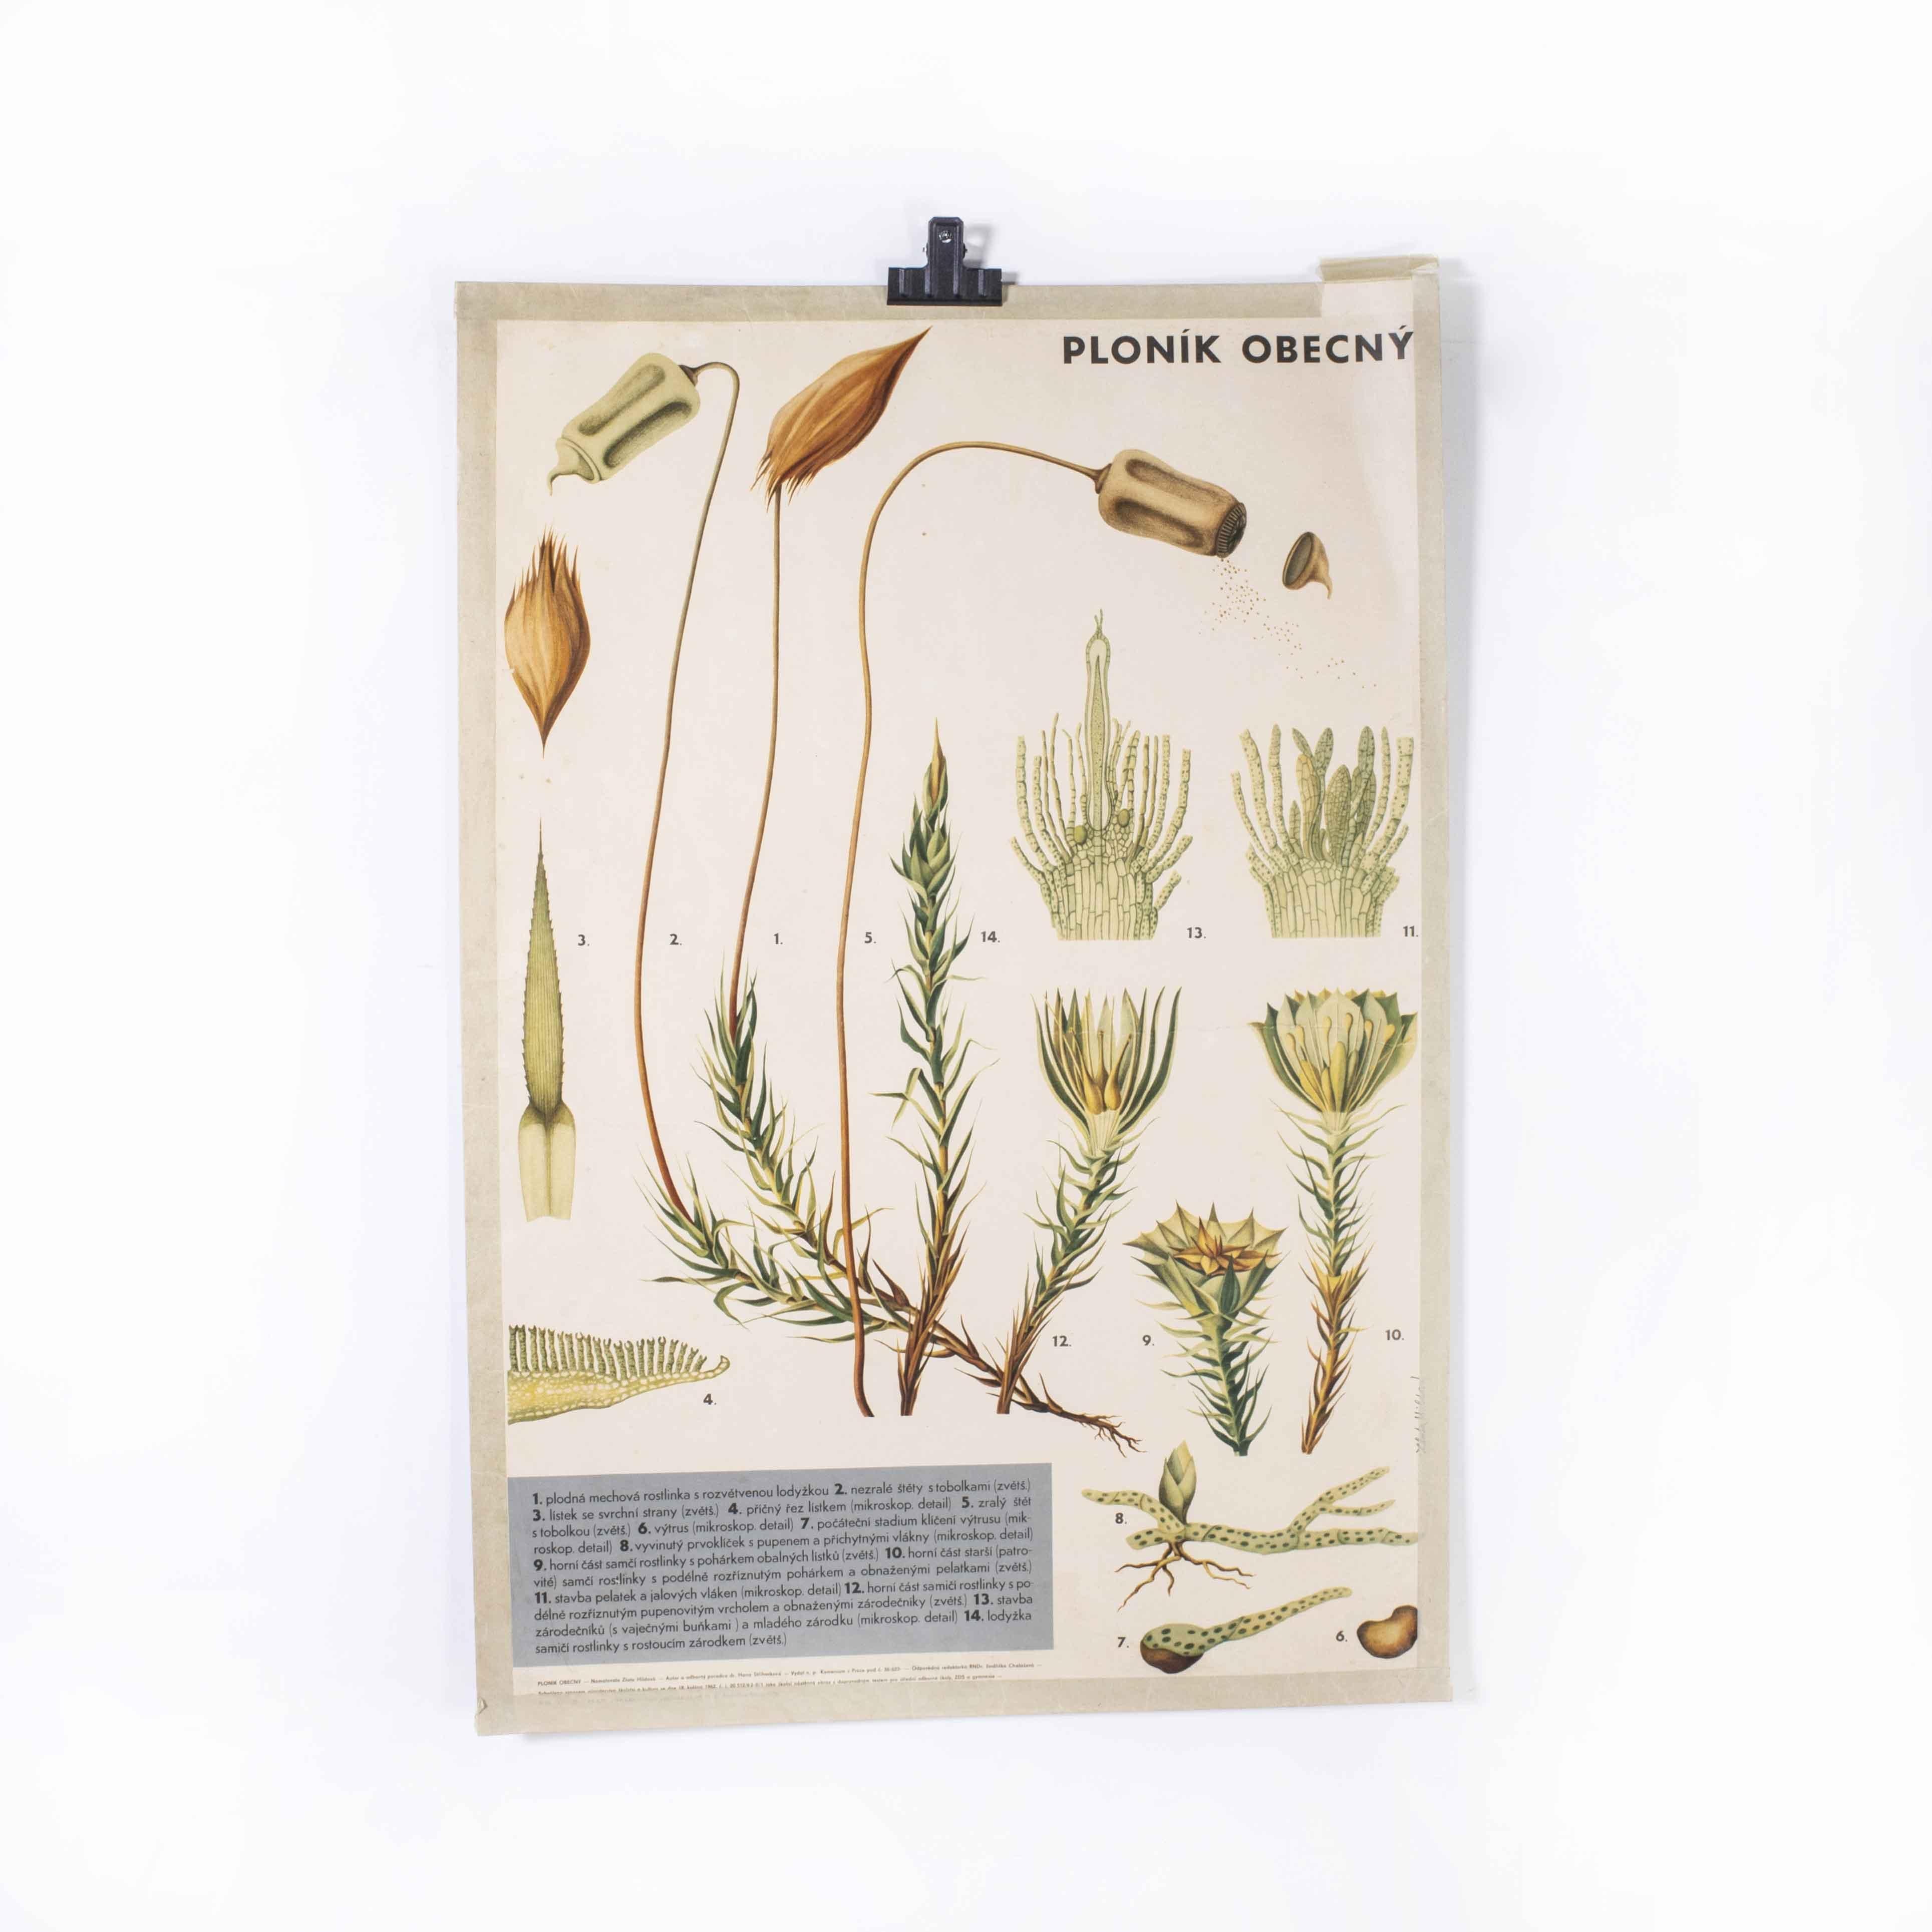 1970’s Plant Educational Poster
1970’s Plant Educational Poster. 20th century Czechoslovakian educational chart. A rare and vintage wall chart from the Czech Republic illustrating the growth of wheat. This heavyweight paper chart is In excellent